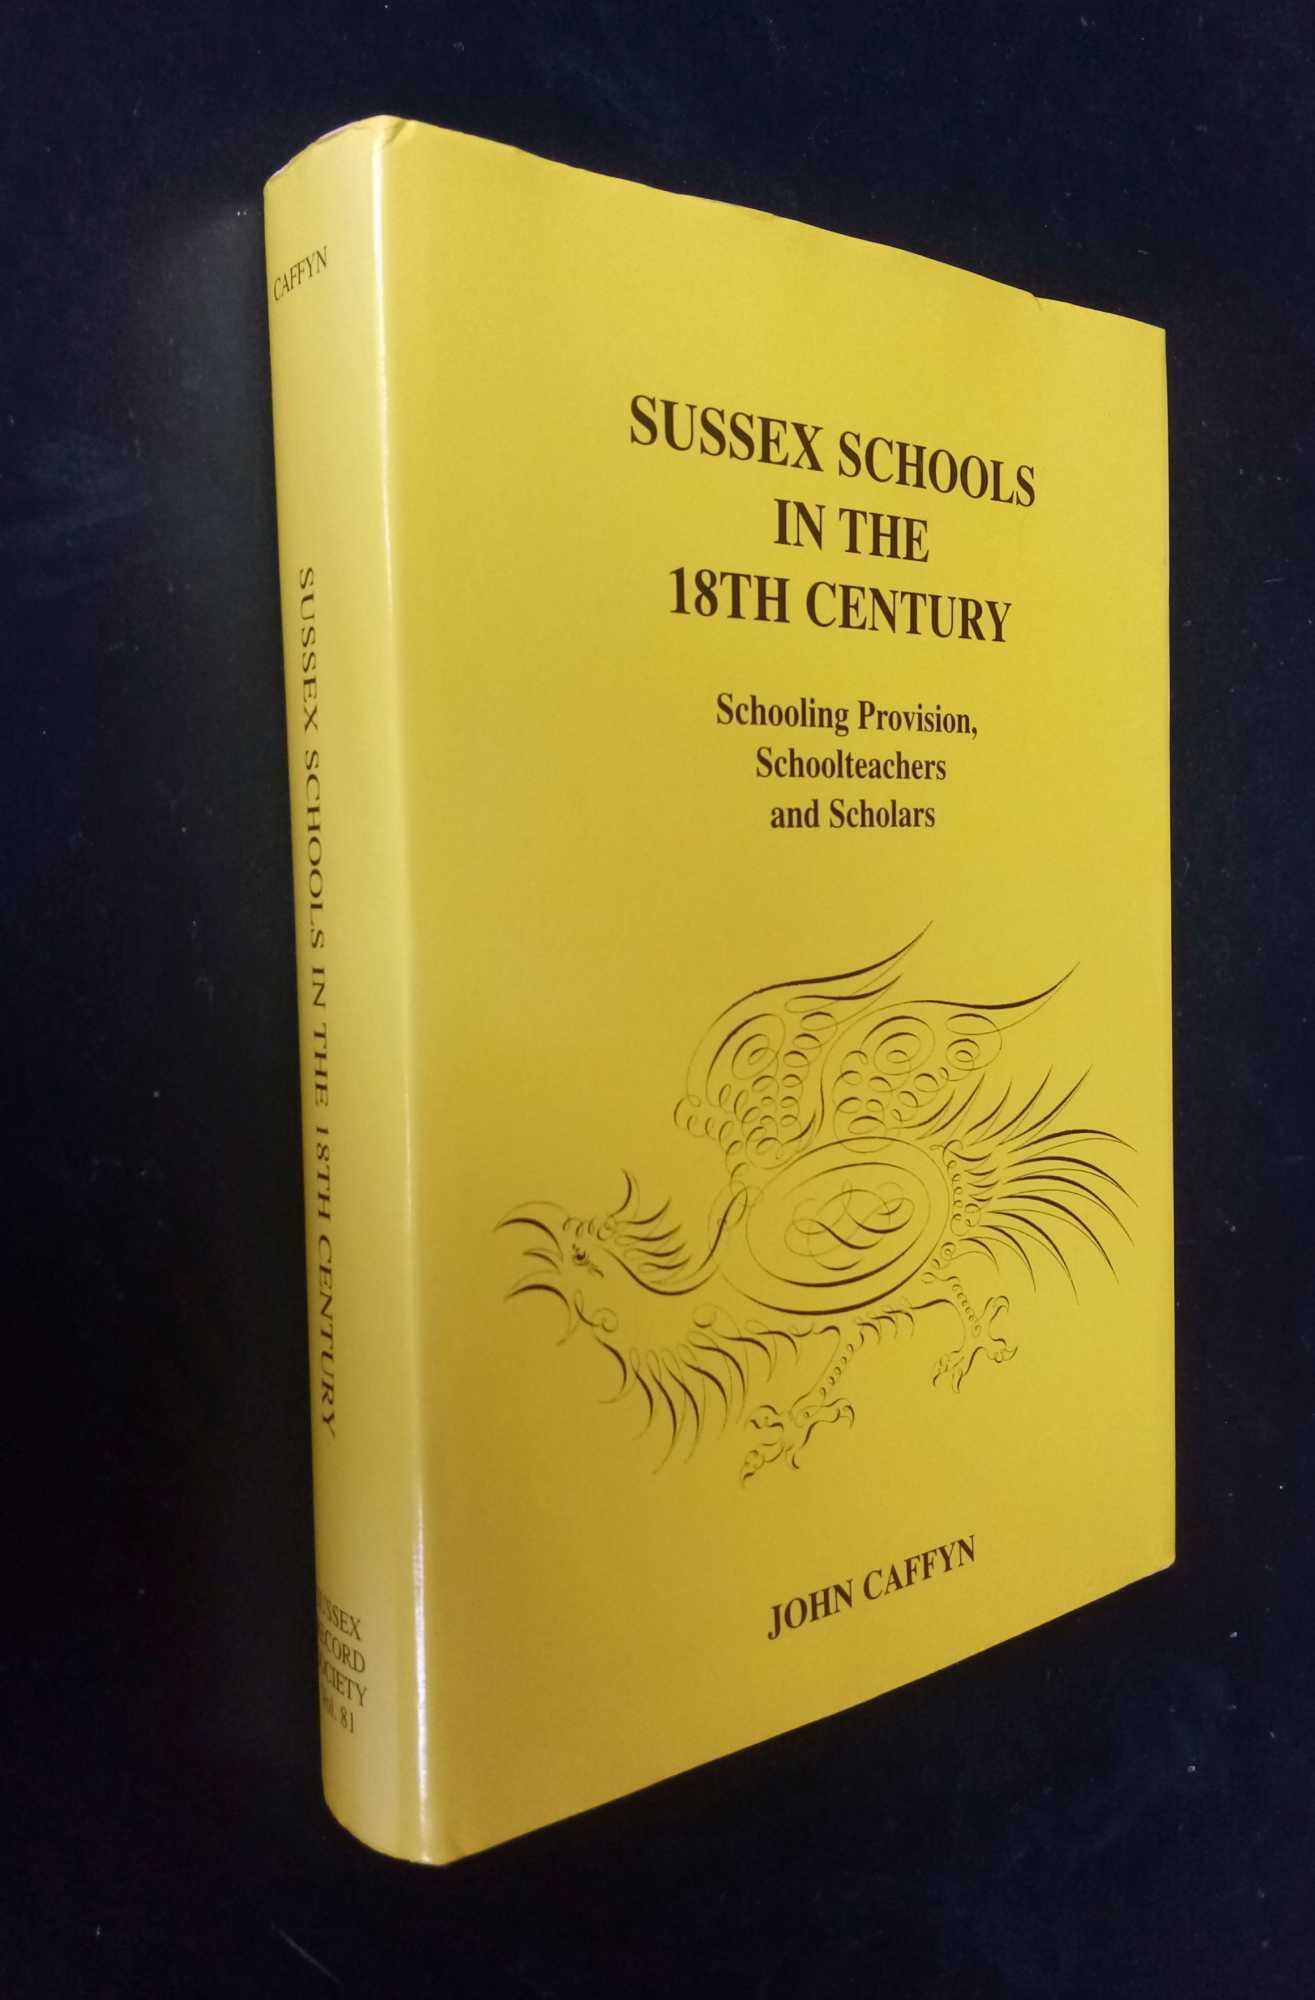 John Caffyn - Sussex Schools In The 18Th Century. Schooling Provision, Schoolteachers And Scholars